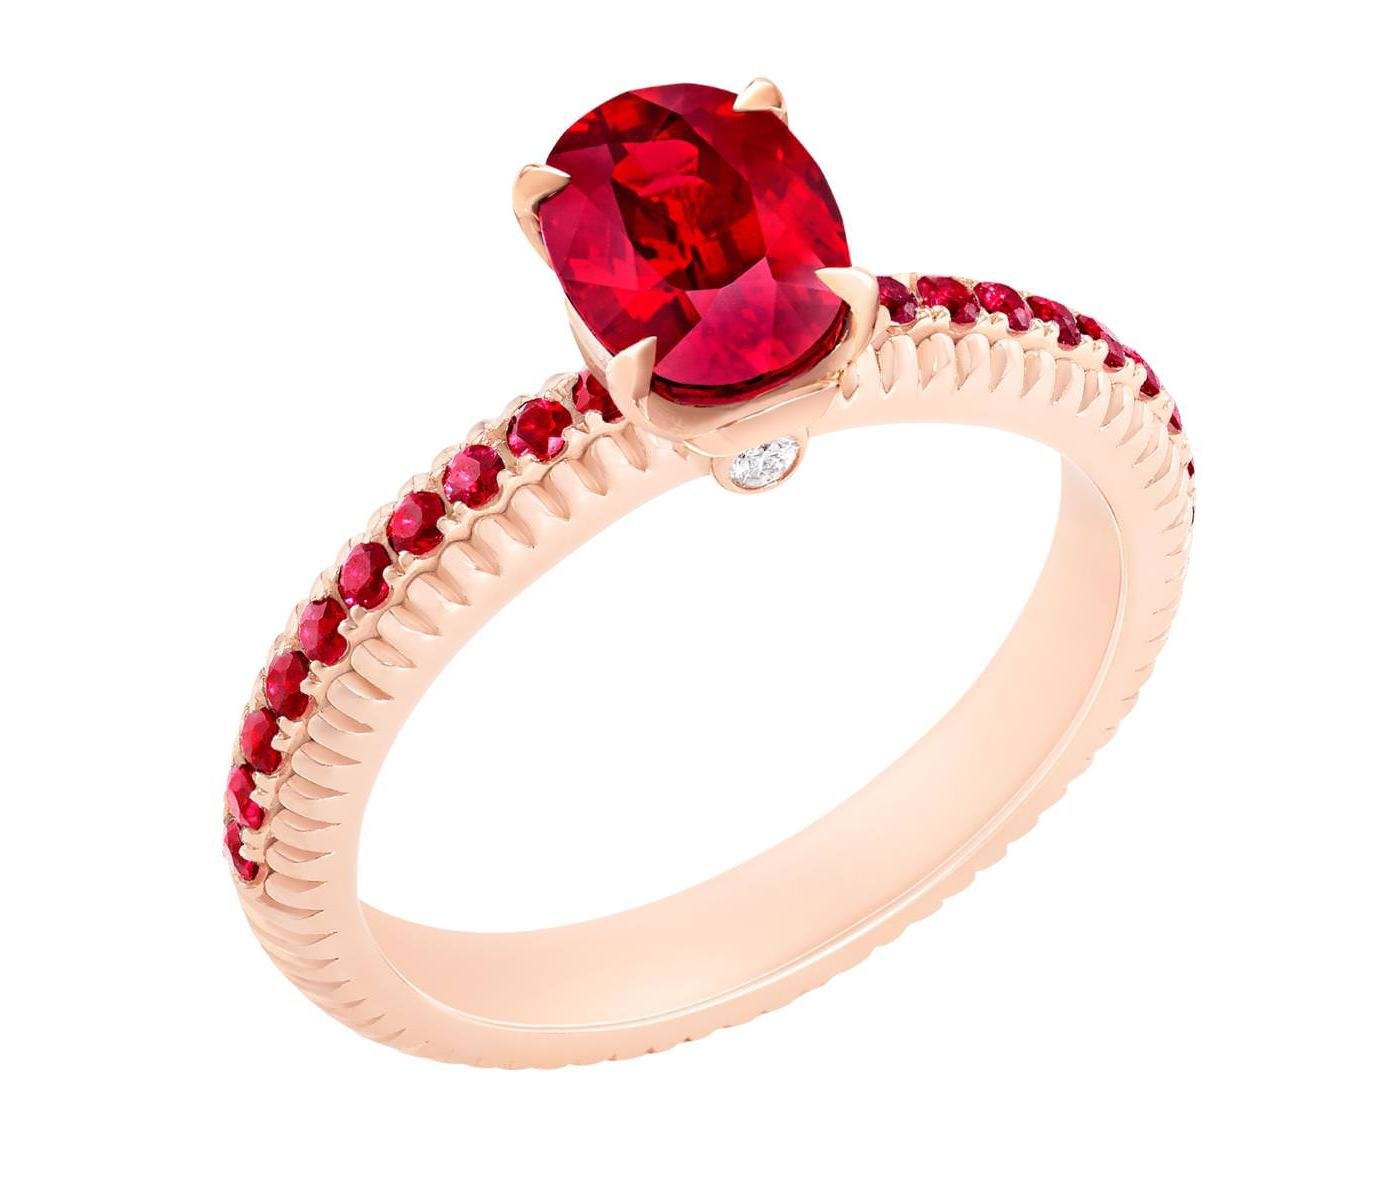 Ring by Fabergé